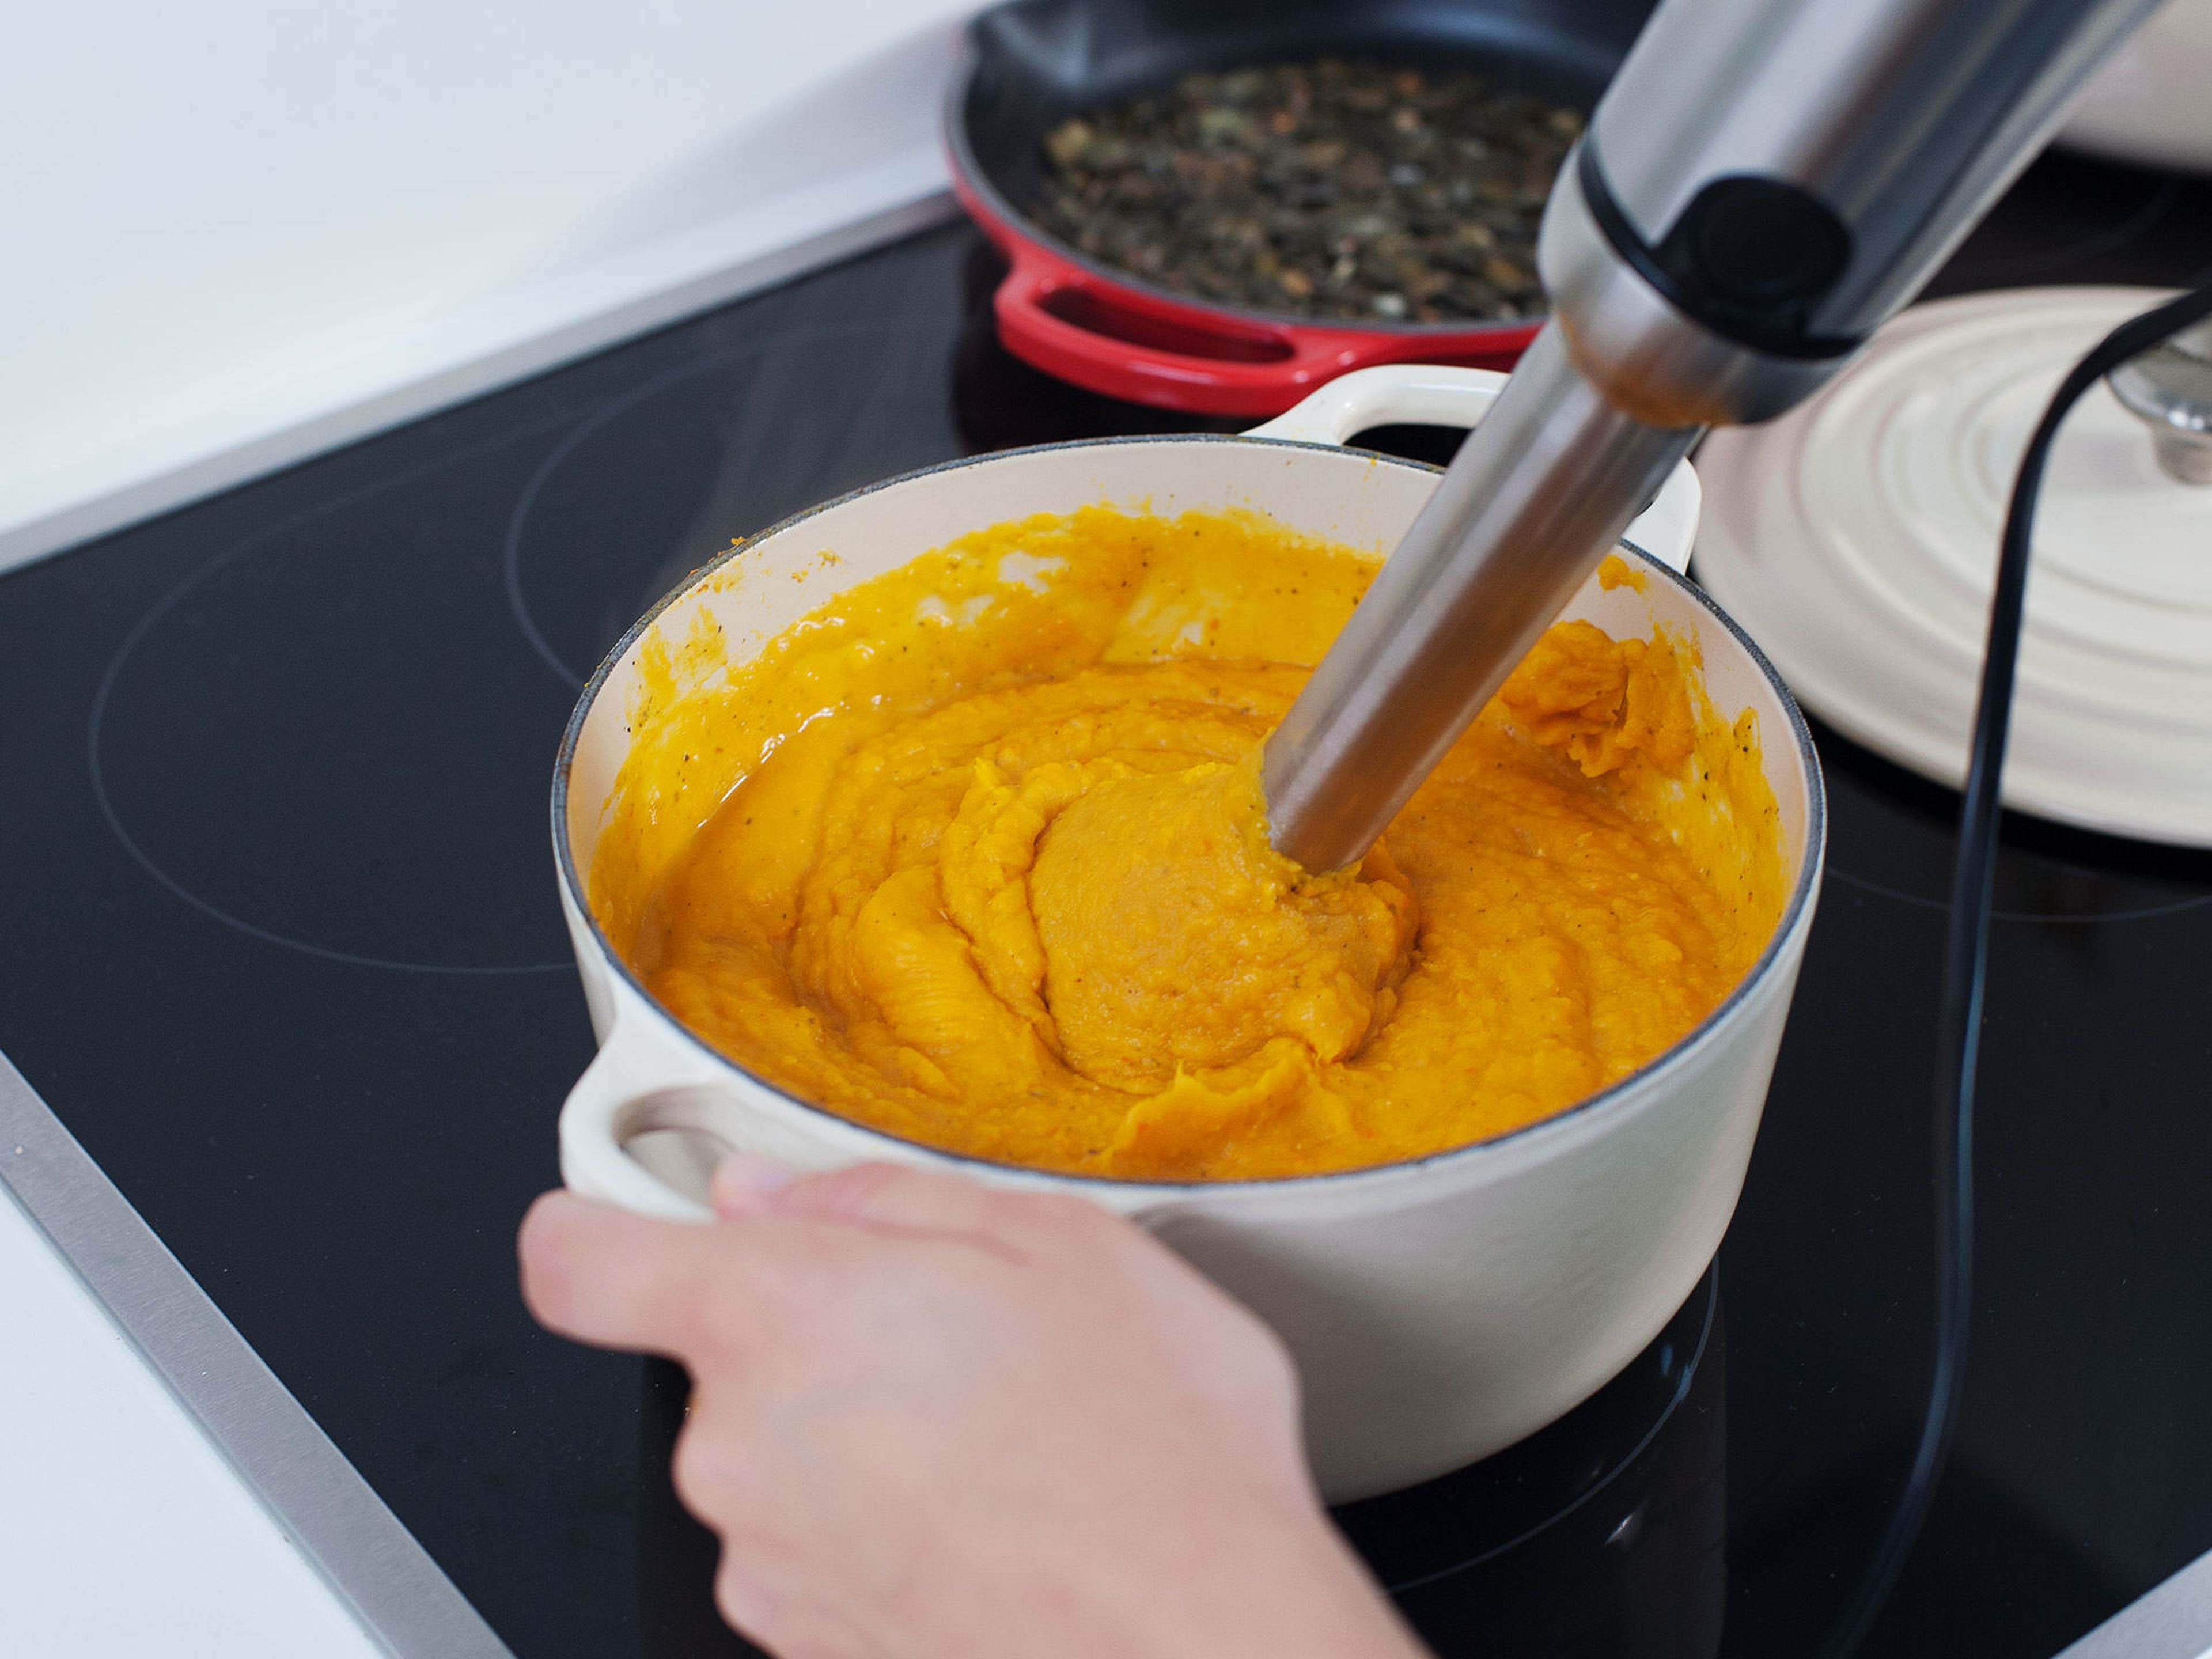 Remove pot from heat and purée pumpkin with a hand blender until smooth. Season with lemon juice and salt and pepper, to taste.